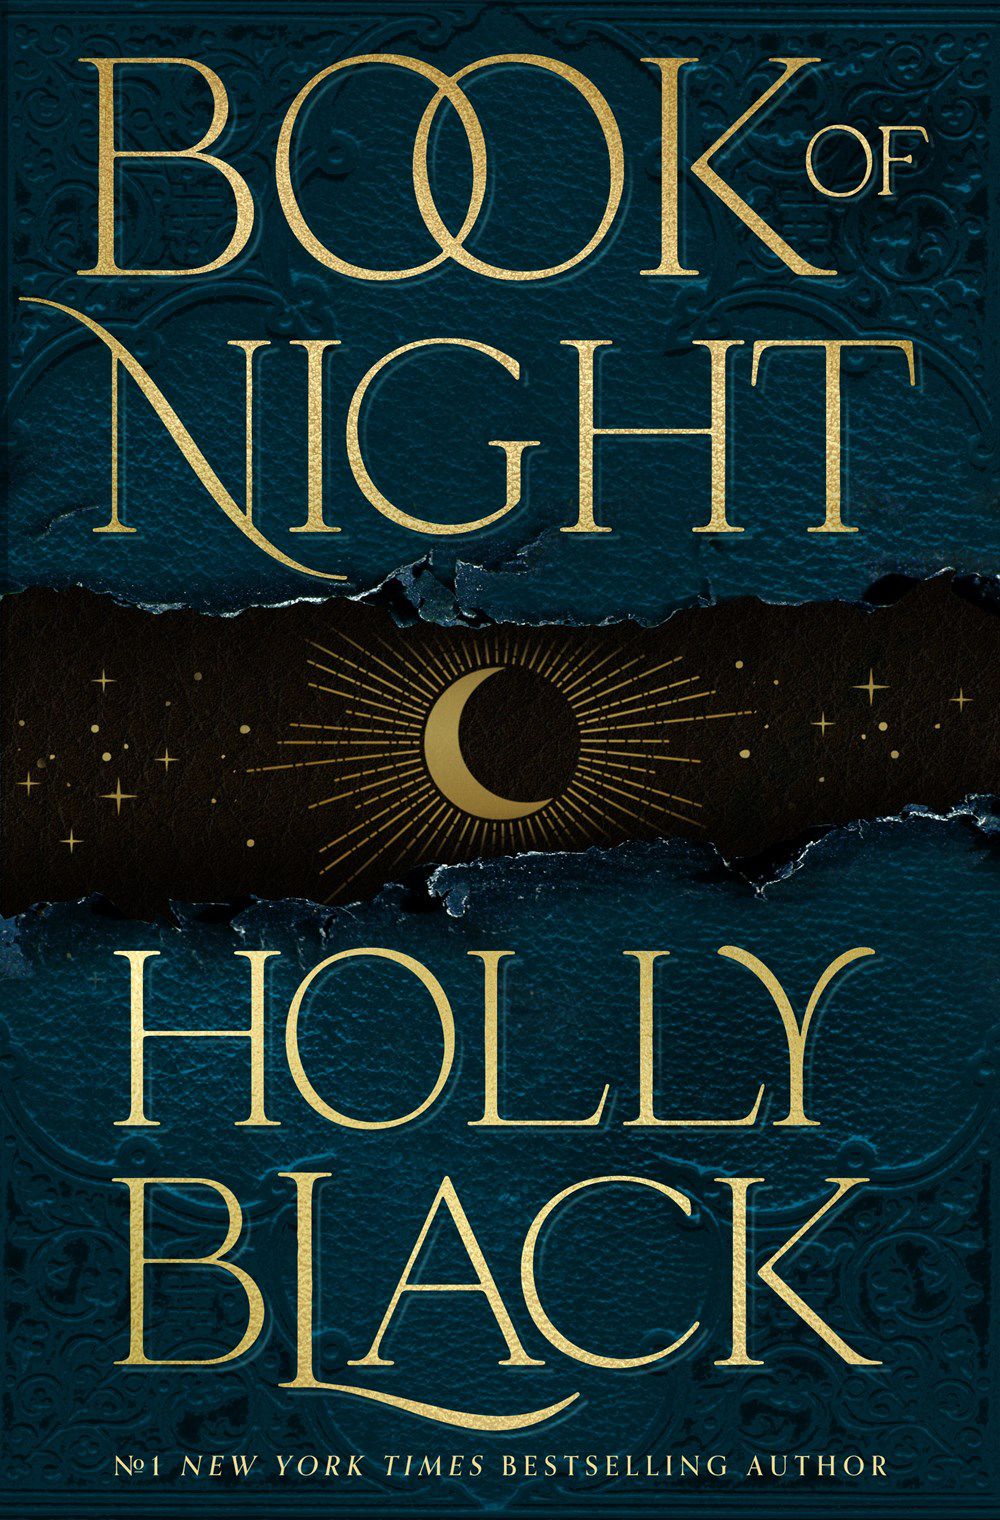 The cover of Book of Night by Holly Black, with a half-moon set against a black and blue background.